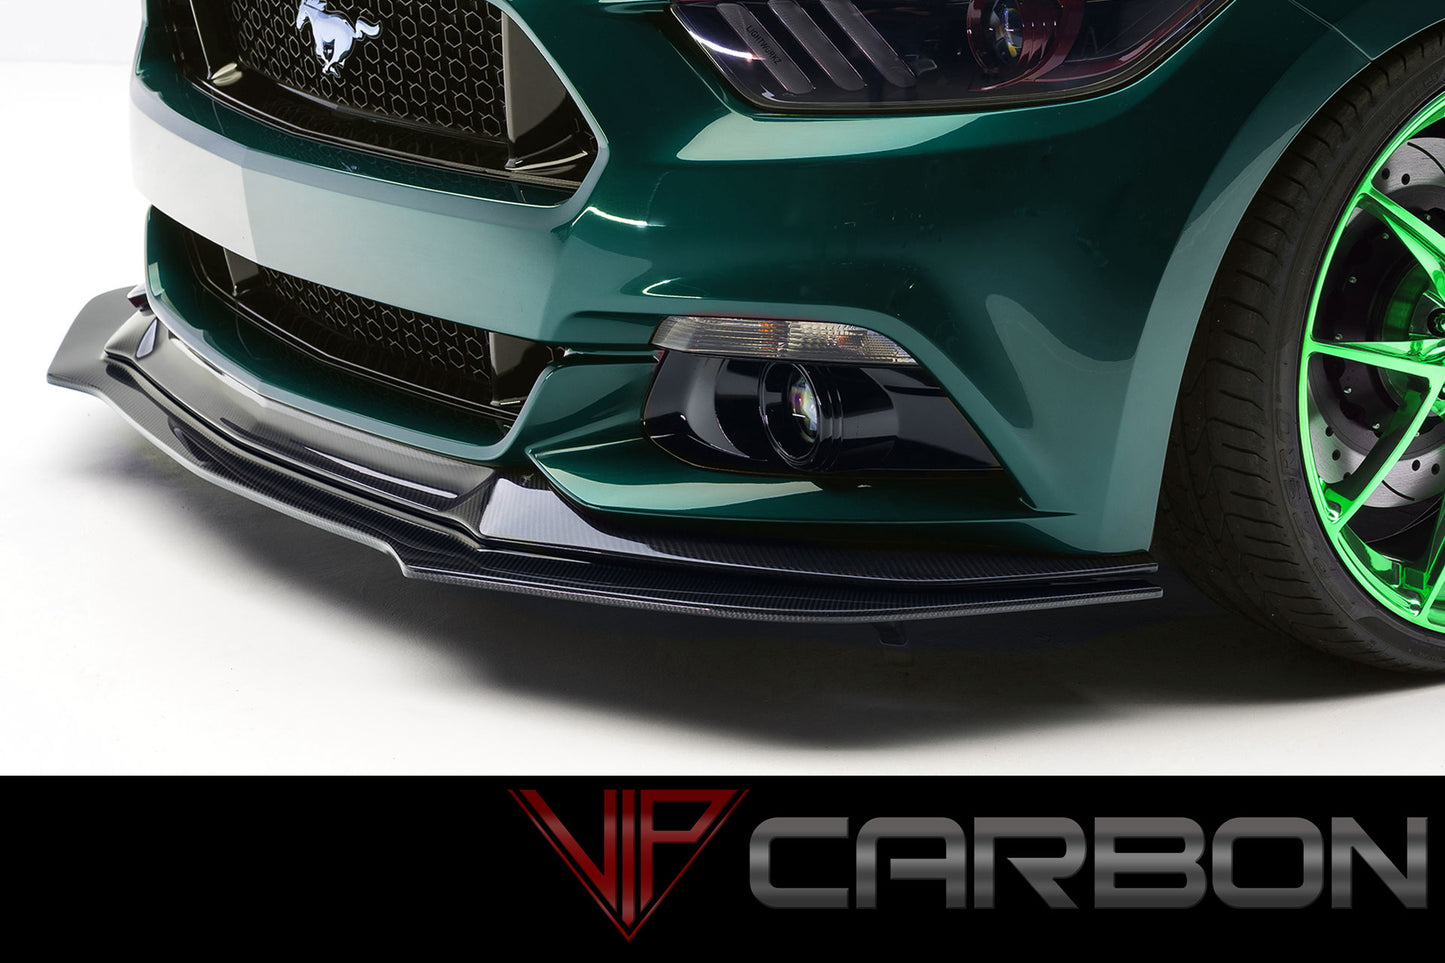 Carbon Fiber GT Front Splitter Ford Mustang 2015-2018 by VIP